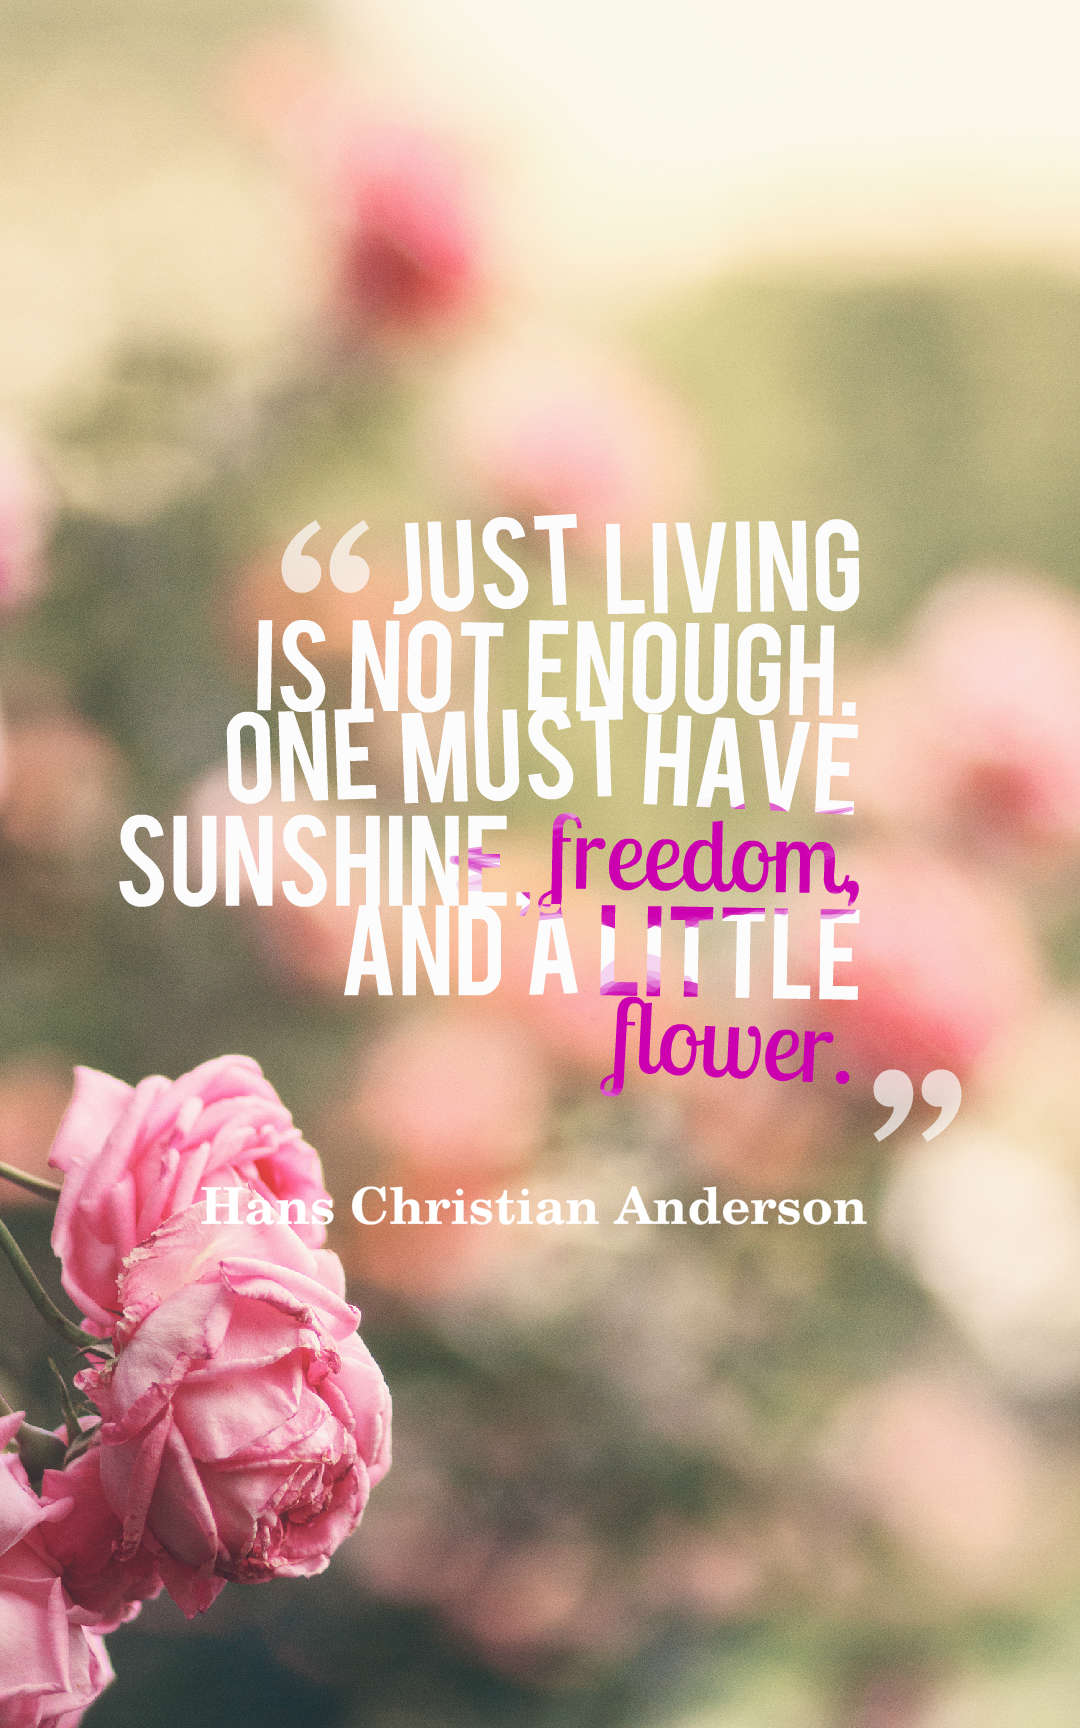 Just living is not enough... one must have sunshine, freedom, and a little flower.